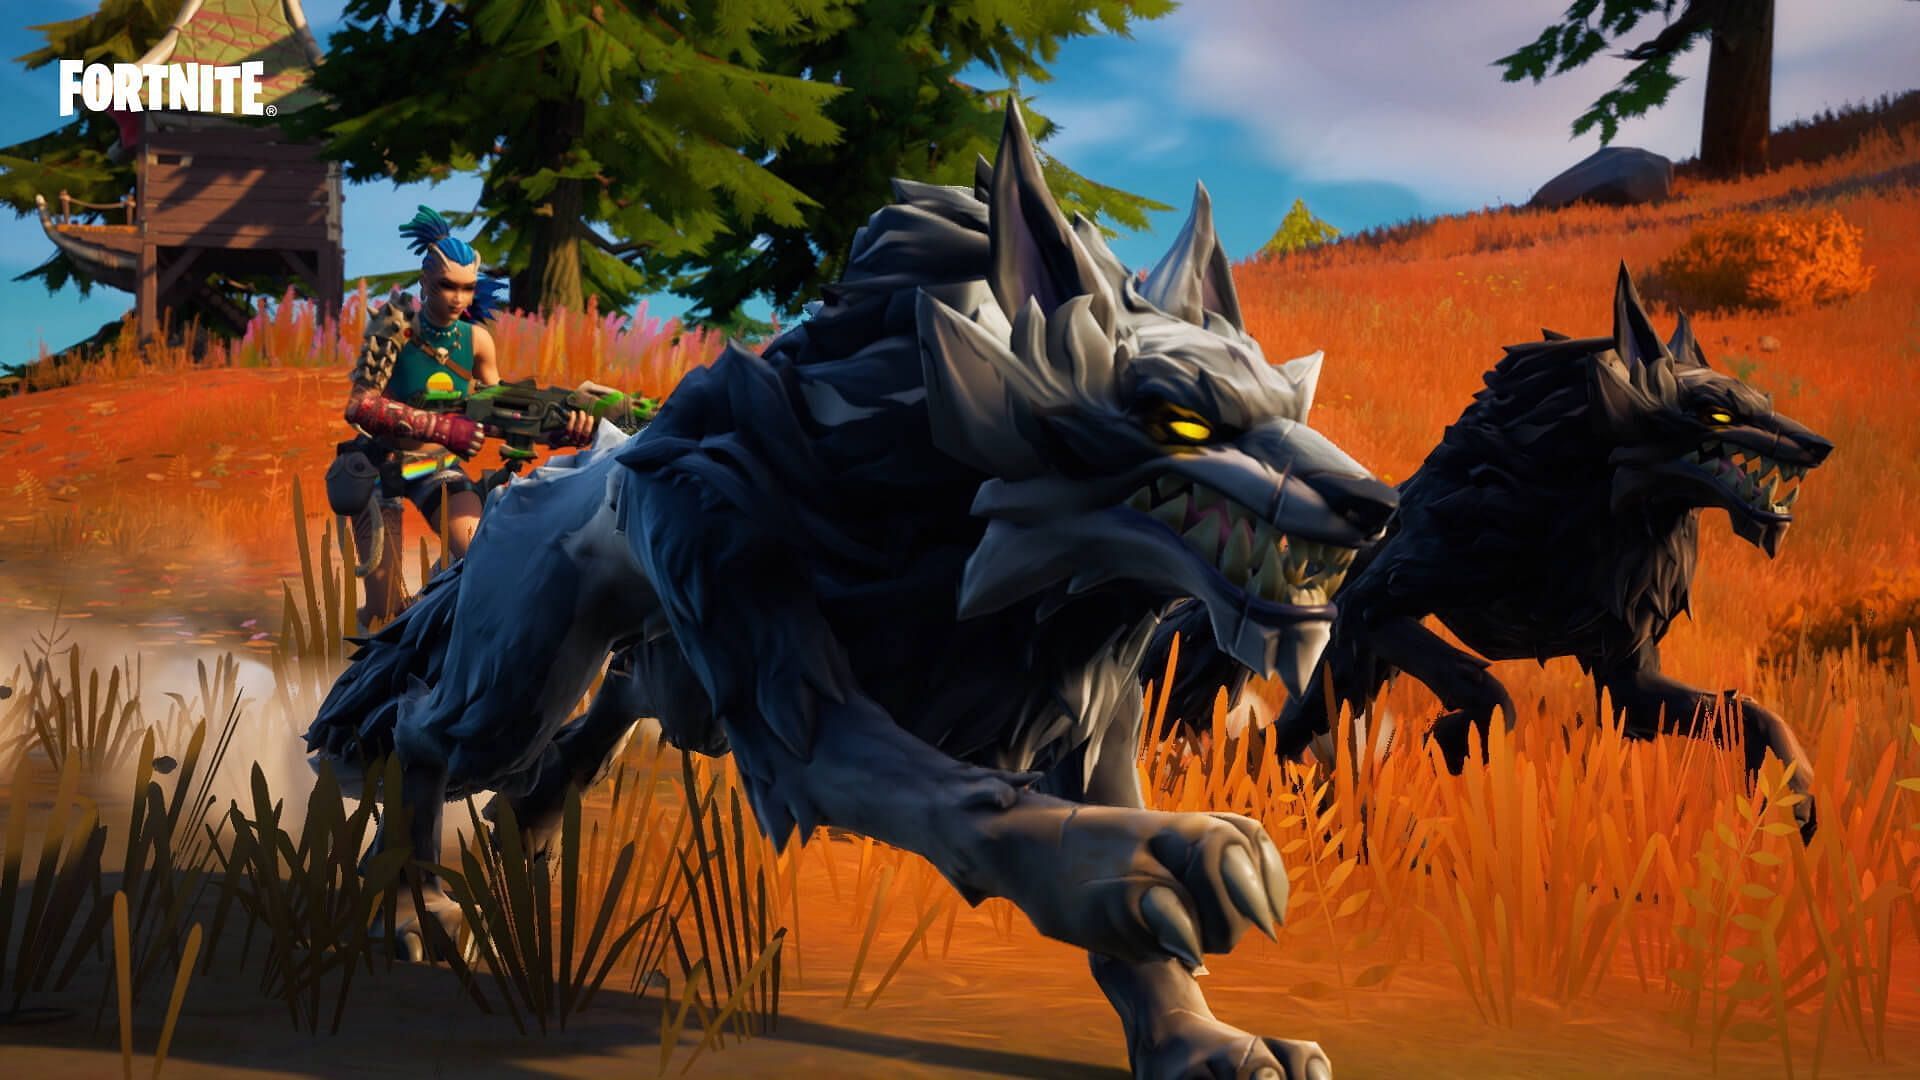 Players can now ride animals in Fortnite. (Image via Epic Games)